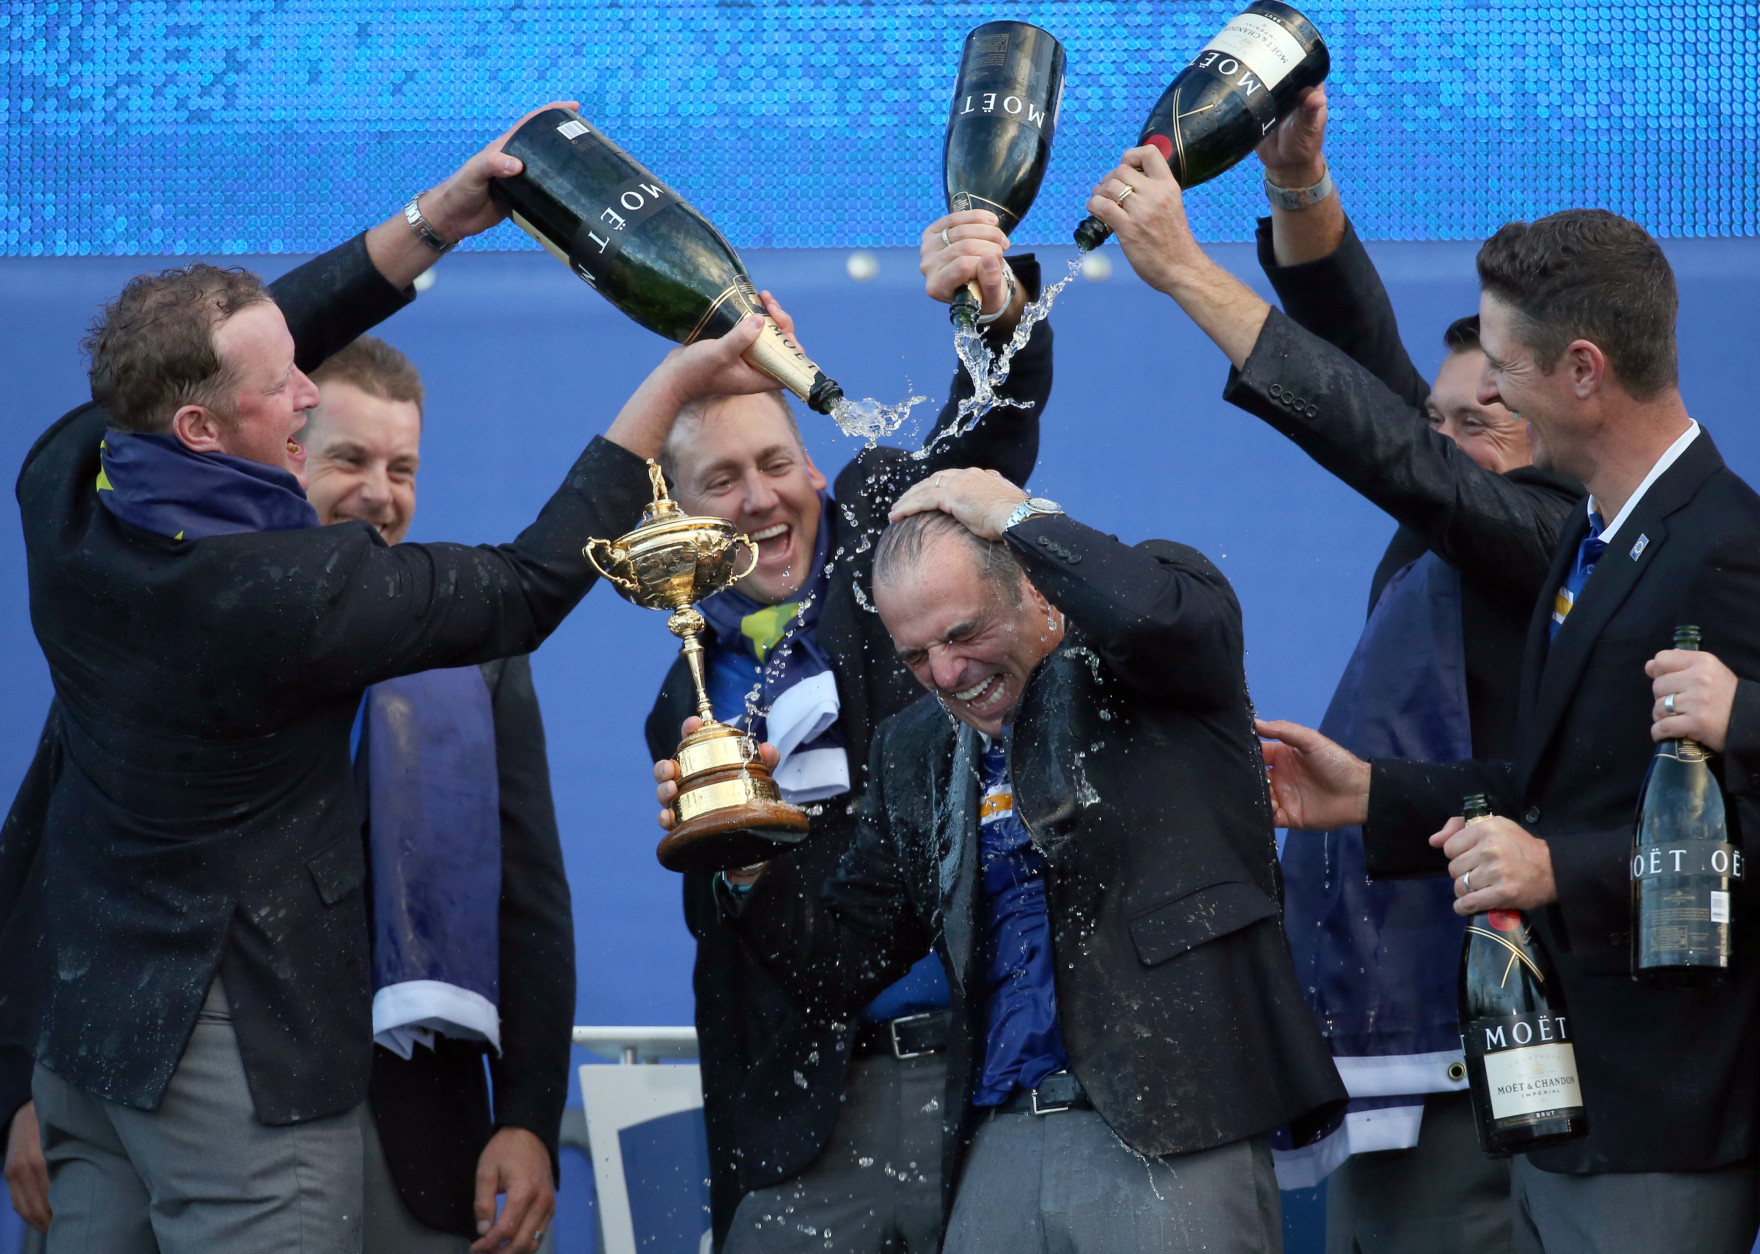 FOR USE AS DESIRED, YEAR END PHOTOS - FILE - From left, Europe's players Jamie Donaldson, Henrik Stenson, Ian Poulter, Lee Westwood and Justin Rose pour champagne over captain Paul McGinley as they celebrate winning the 2014 Ryder Cup golf tournament, at Gleneagles, Scotland, Sunday, Sept. 28, 2014. (AP Photo/Scott Heppell, File)